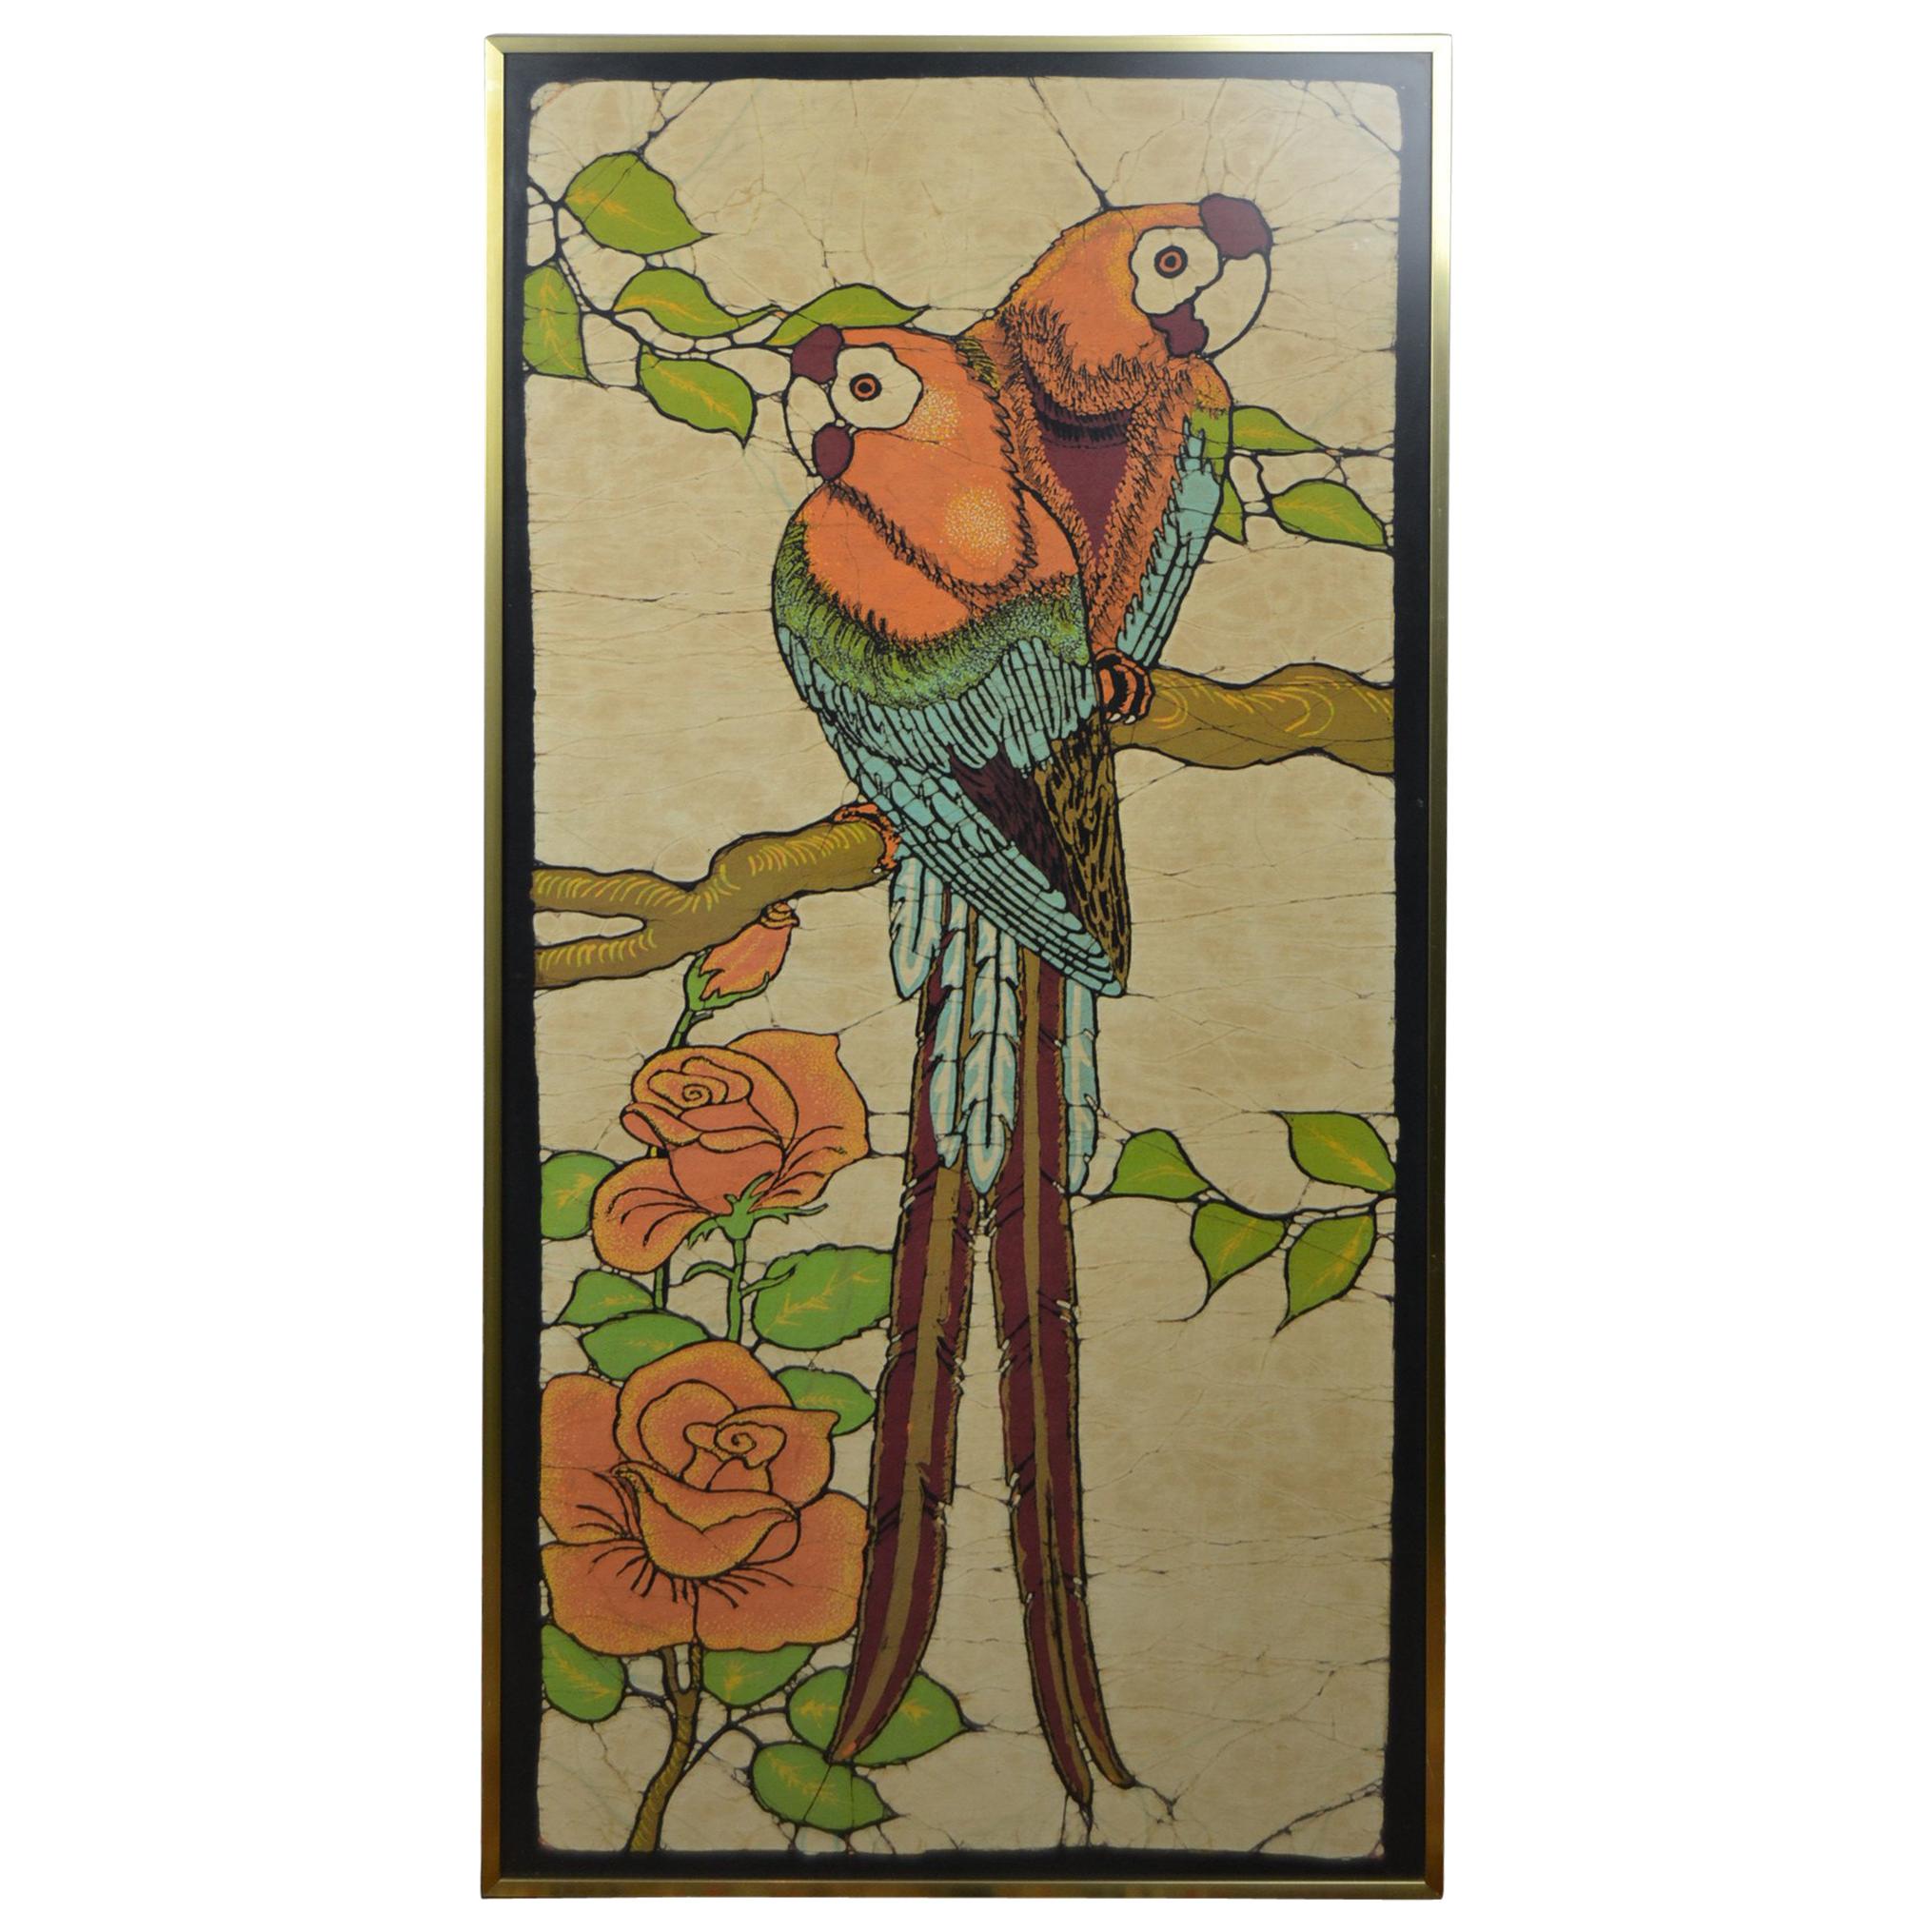 1960s Messing Framed Print on Linen with Two Ara's or Parrots in a Tree